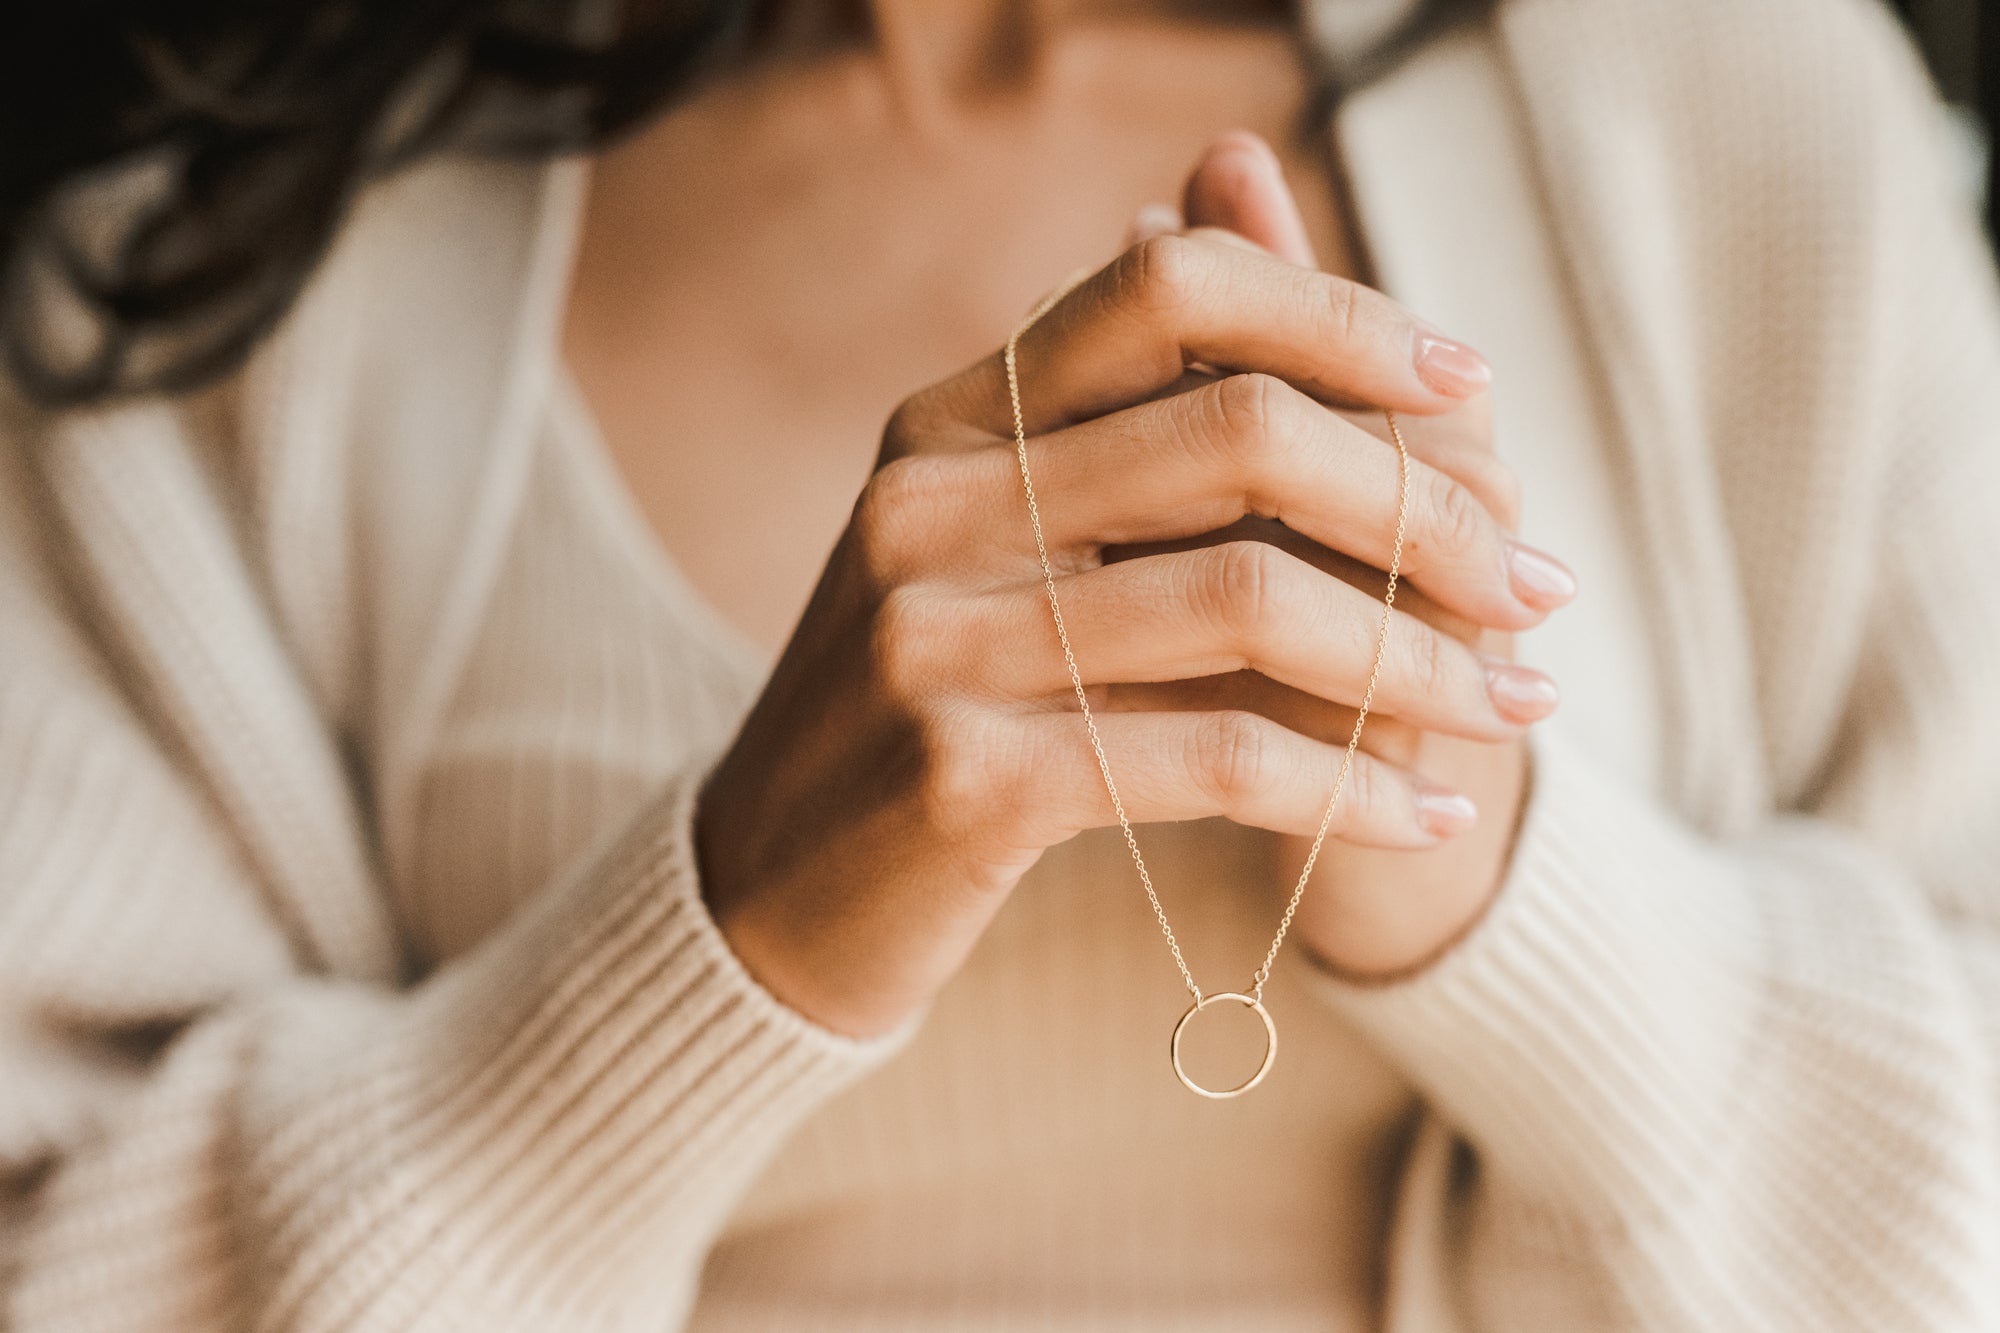 A woman in a cream sweater clasping a delicate pendant necklace.